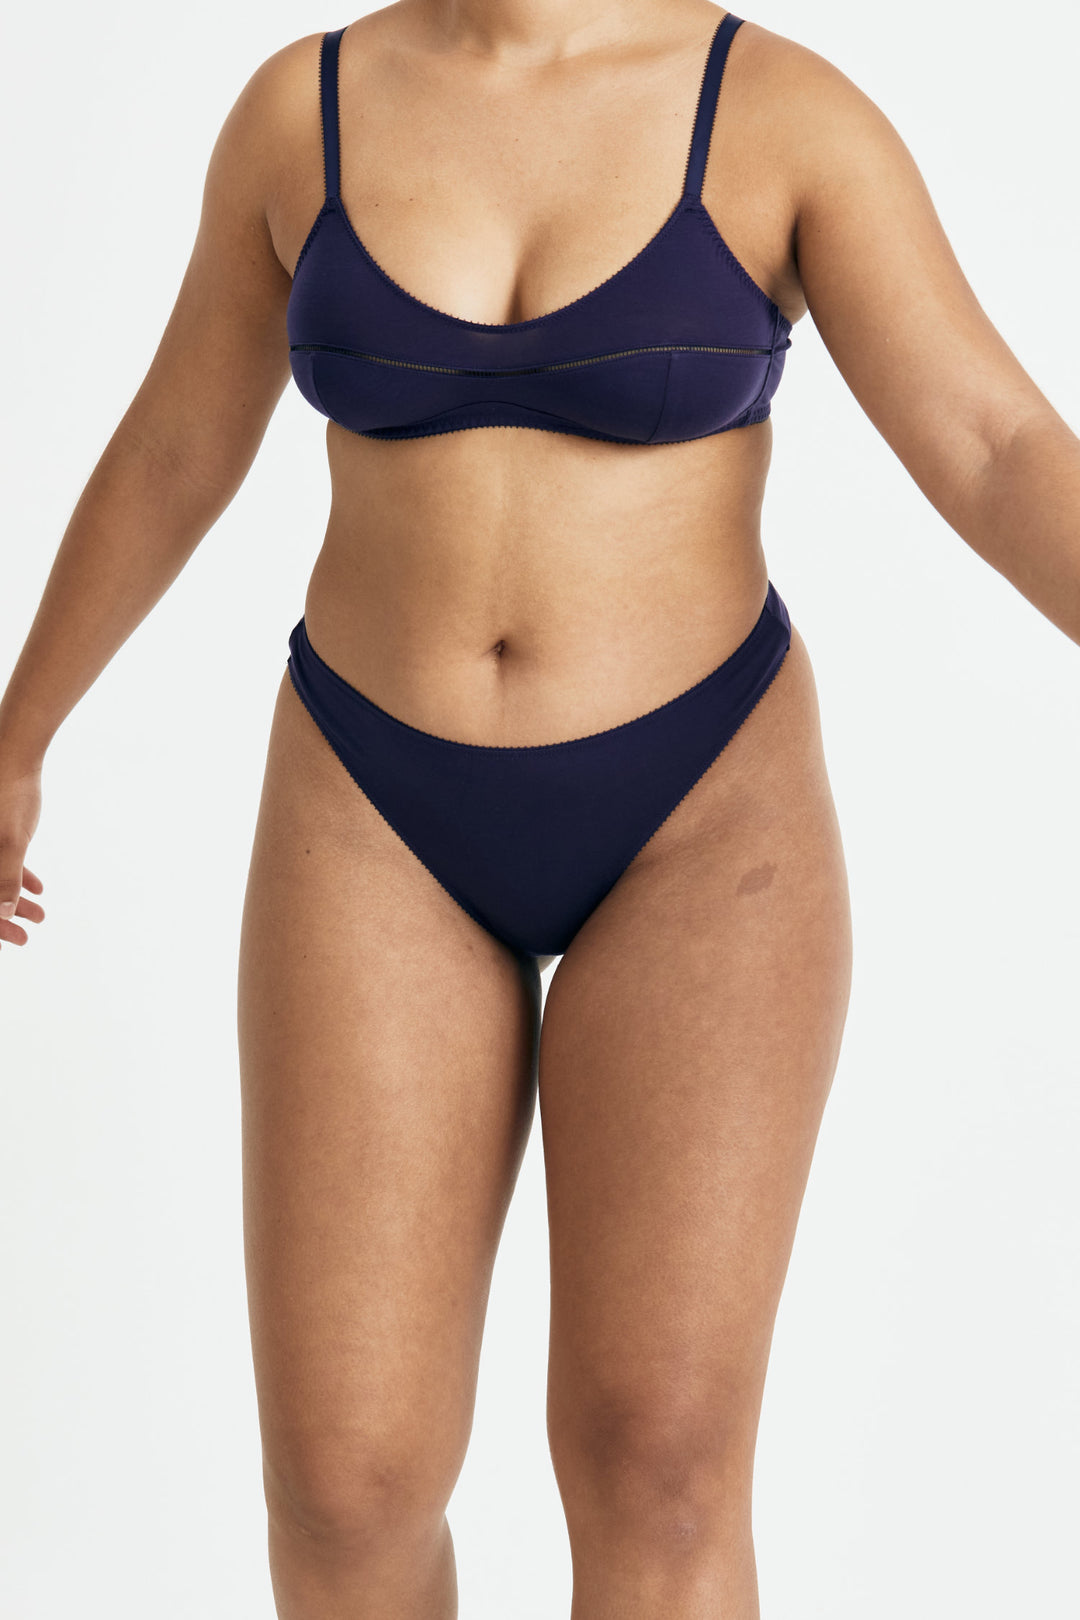 Videris Lingerie thong in indigo TENCEL™ a comfortable mid-rise style that elongates the legs